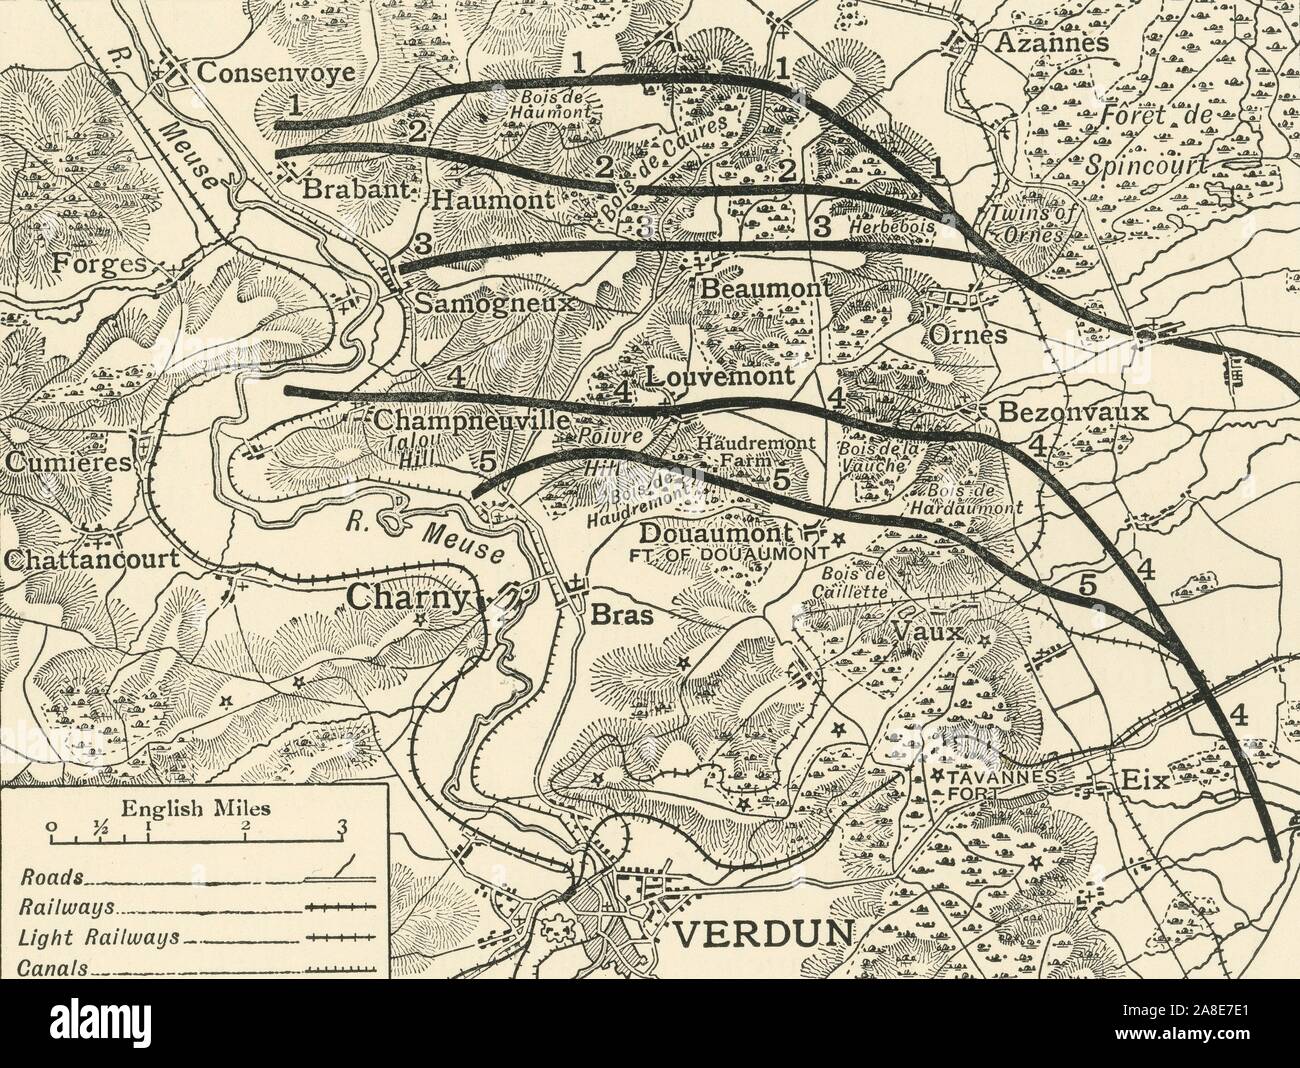 'Map showing the Various Stages in the First Phase of the Attack on Verdun' northern France, First World War, 1916, (c1920). 'The German attack on the French lines at Verdun began on the east side of the [River] Meuse at dawn on February 21, 1916. The most northerly line drawn on the map shows the French position at the time of the German onset. The other lines show the successive positions taken up by the French as they were forced back on February 22, 23, 24, and 25. On Friday, February 25, the final adjustment of the French line in the first phase of the struggle east of the Meuse took plac Stock Photo